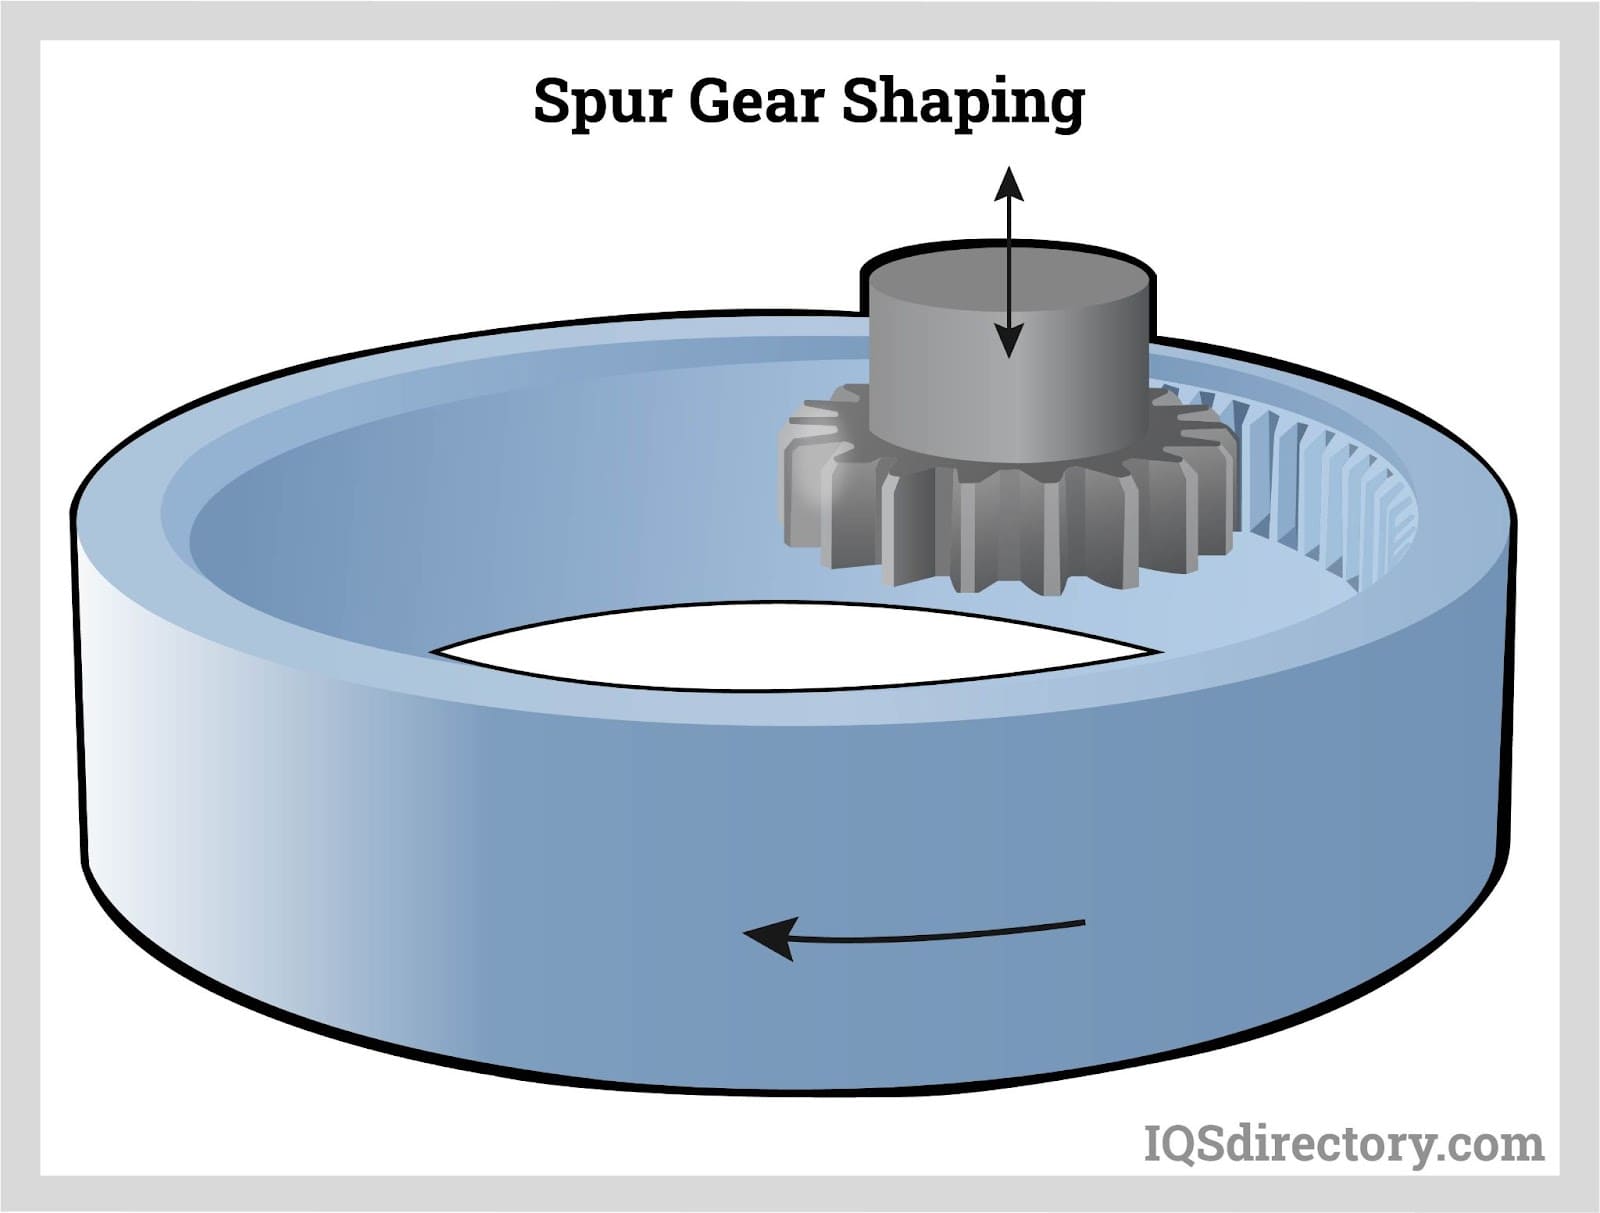 Spur Gear Shaping